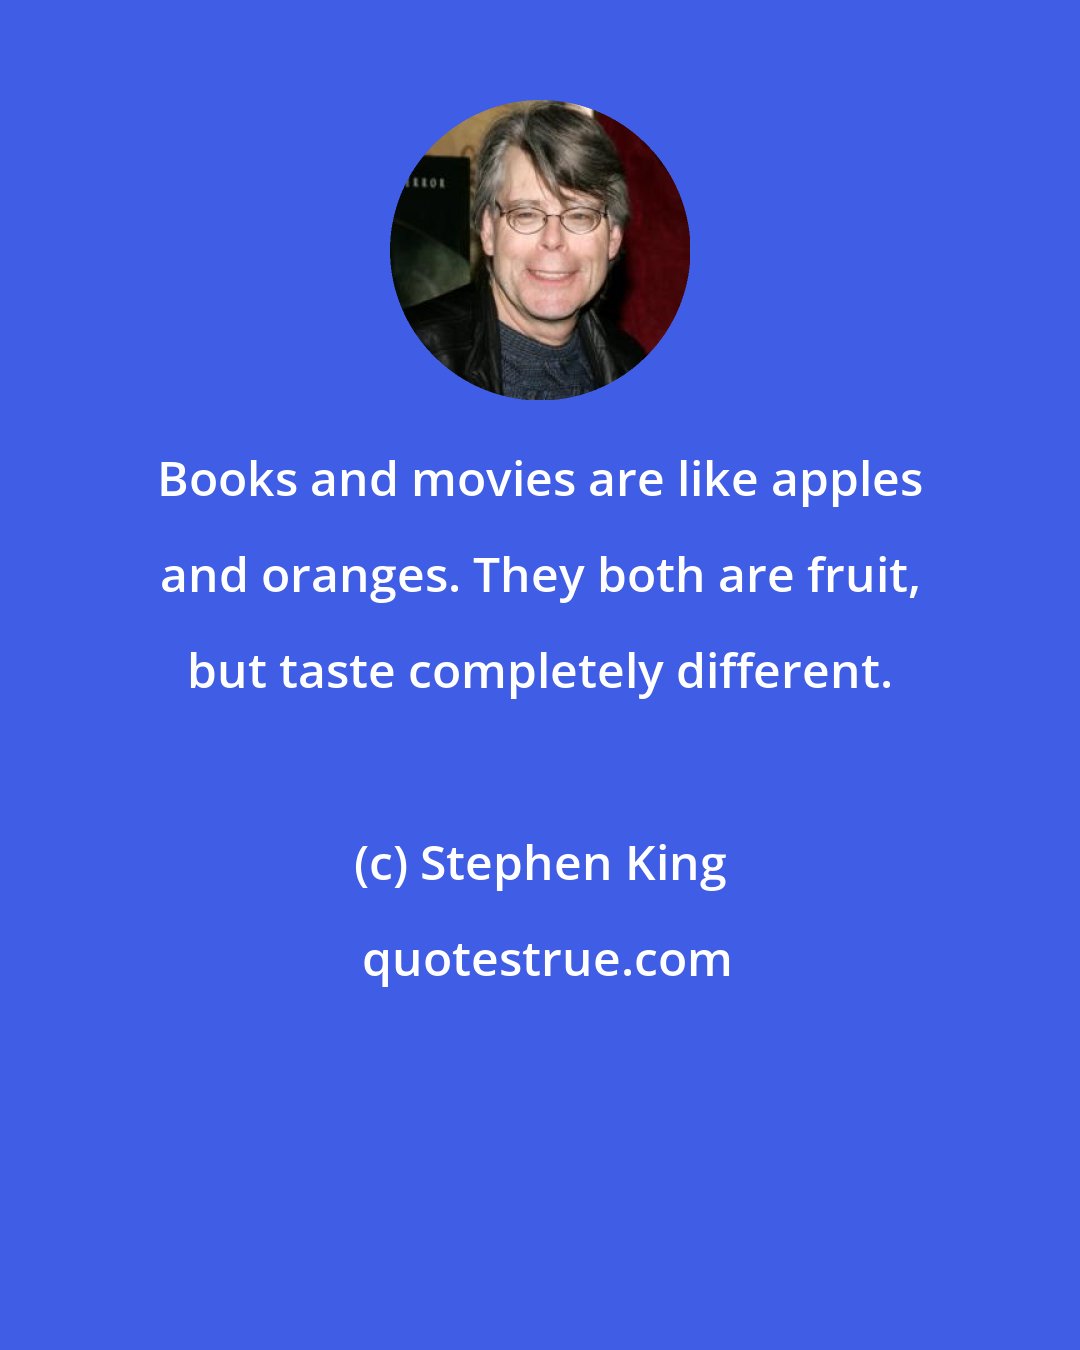 Stephen King: Books and movies are like apples and oranges. They both are fruit, but taste completely different.